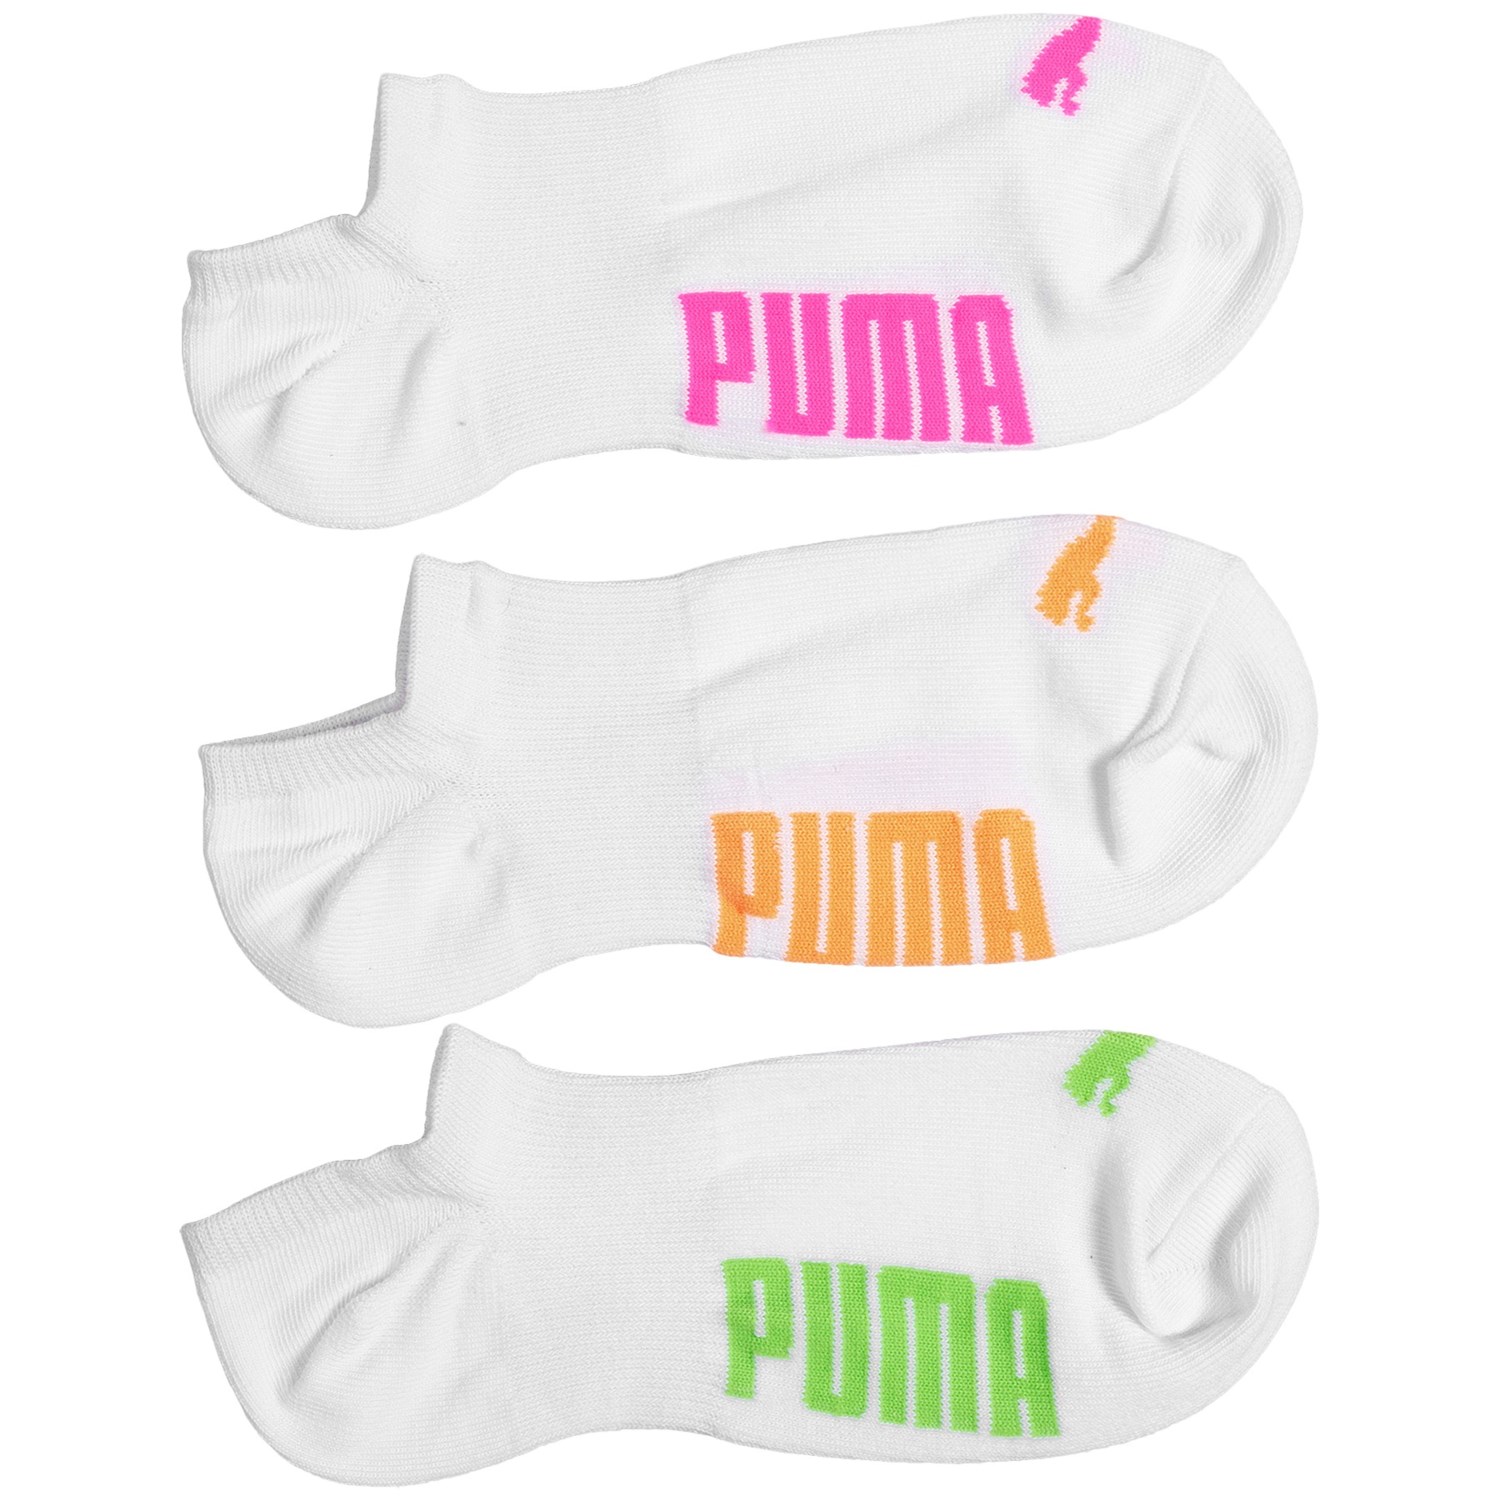 Puma No-Show Socks – Below-the-Ankle, 3-Pack (For Girls)